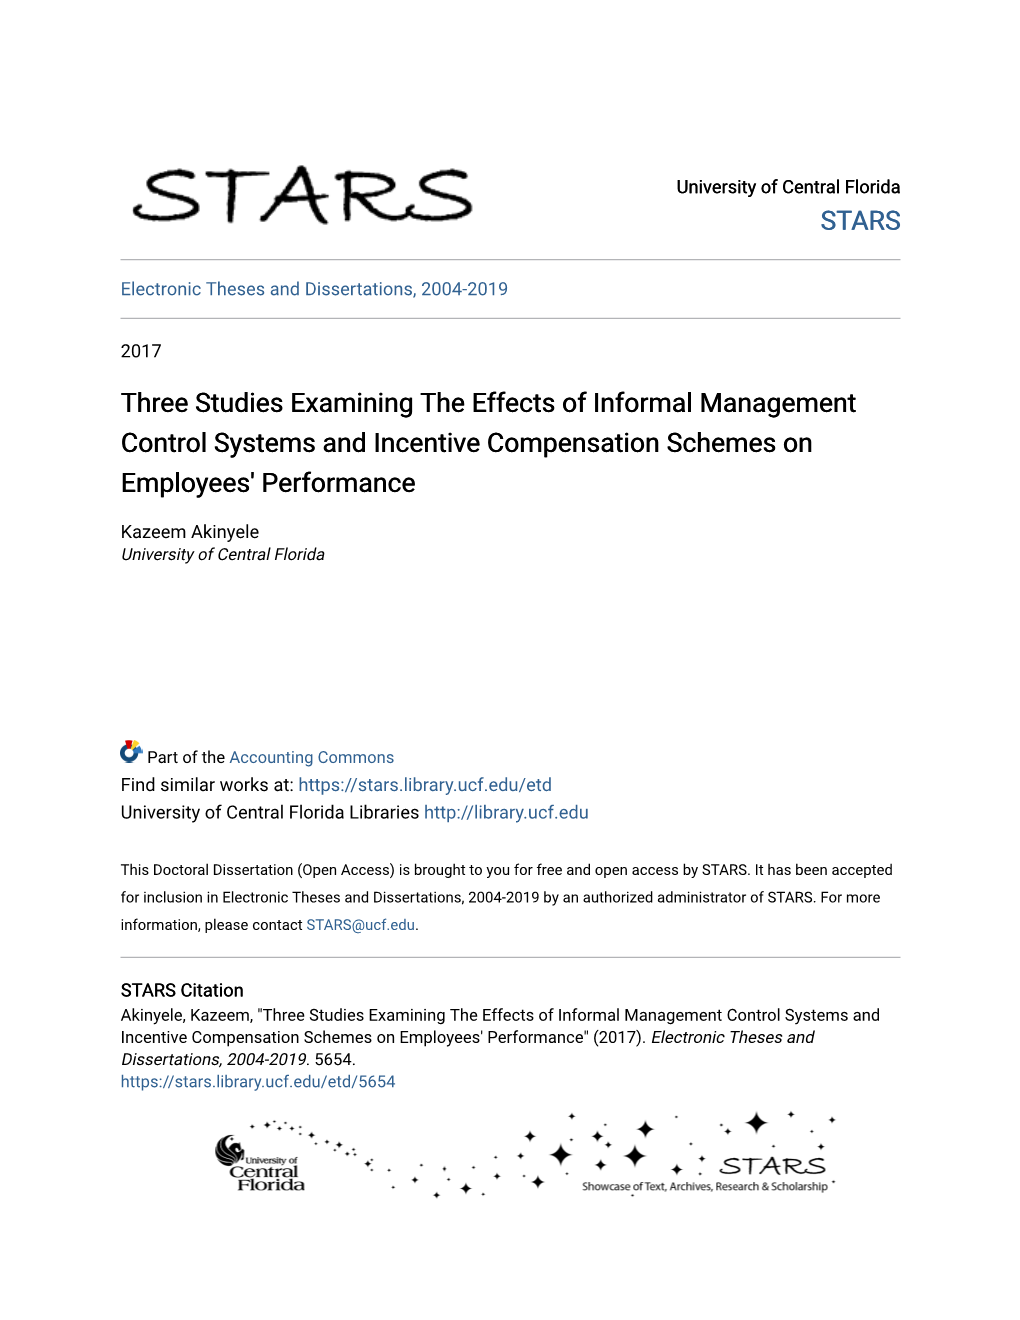 Three Studies Examining the Effects of Informal Management Control Systems and Incentive Compensation Schemes on Employees' Performance